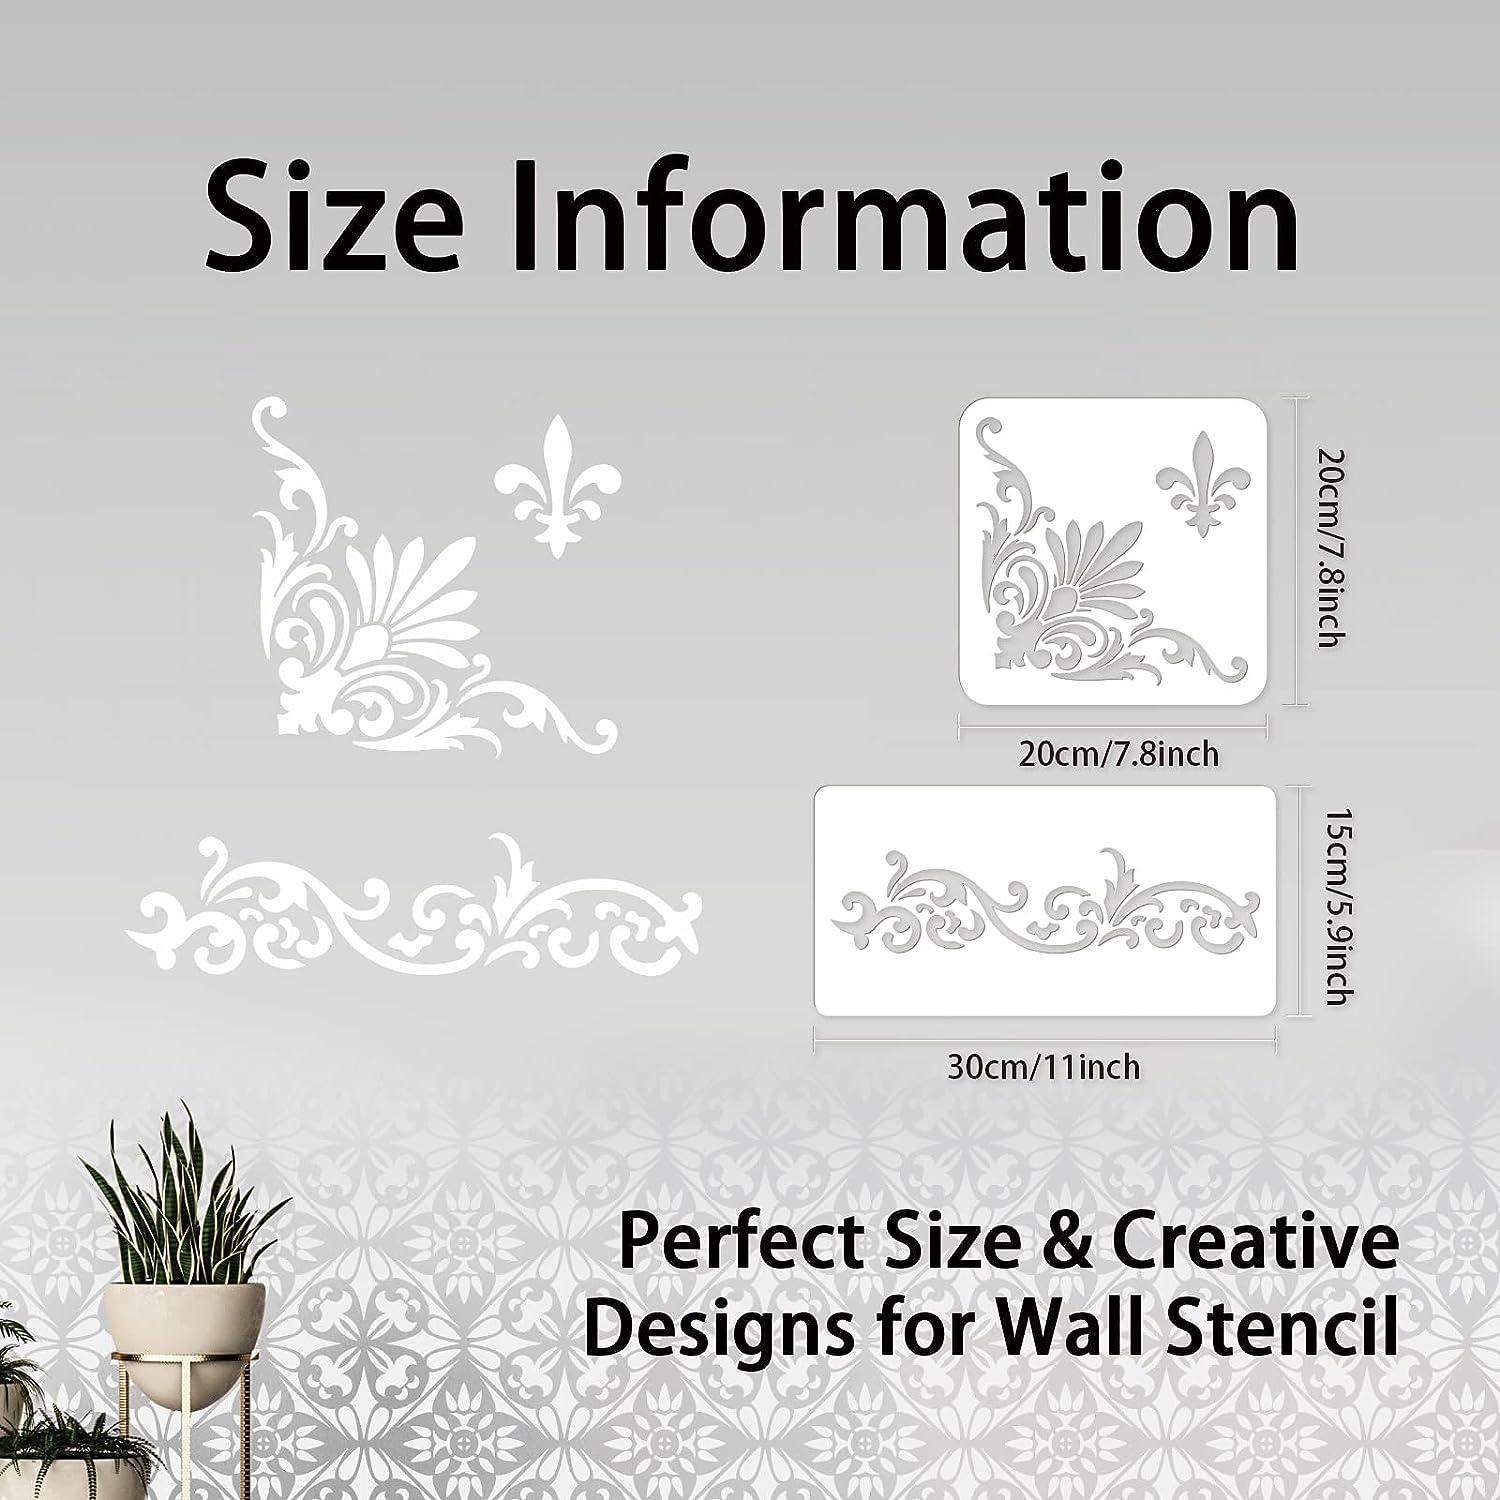 INFUNLY 4PCS Corner Stencils for Painting Flower Square Border Wall Stencil  Large Pattern Tile Stencil Reusable DIY Art Craft Stencils Furniture Decor  on Wood, Canvas, Paper, Fabric, Floor